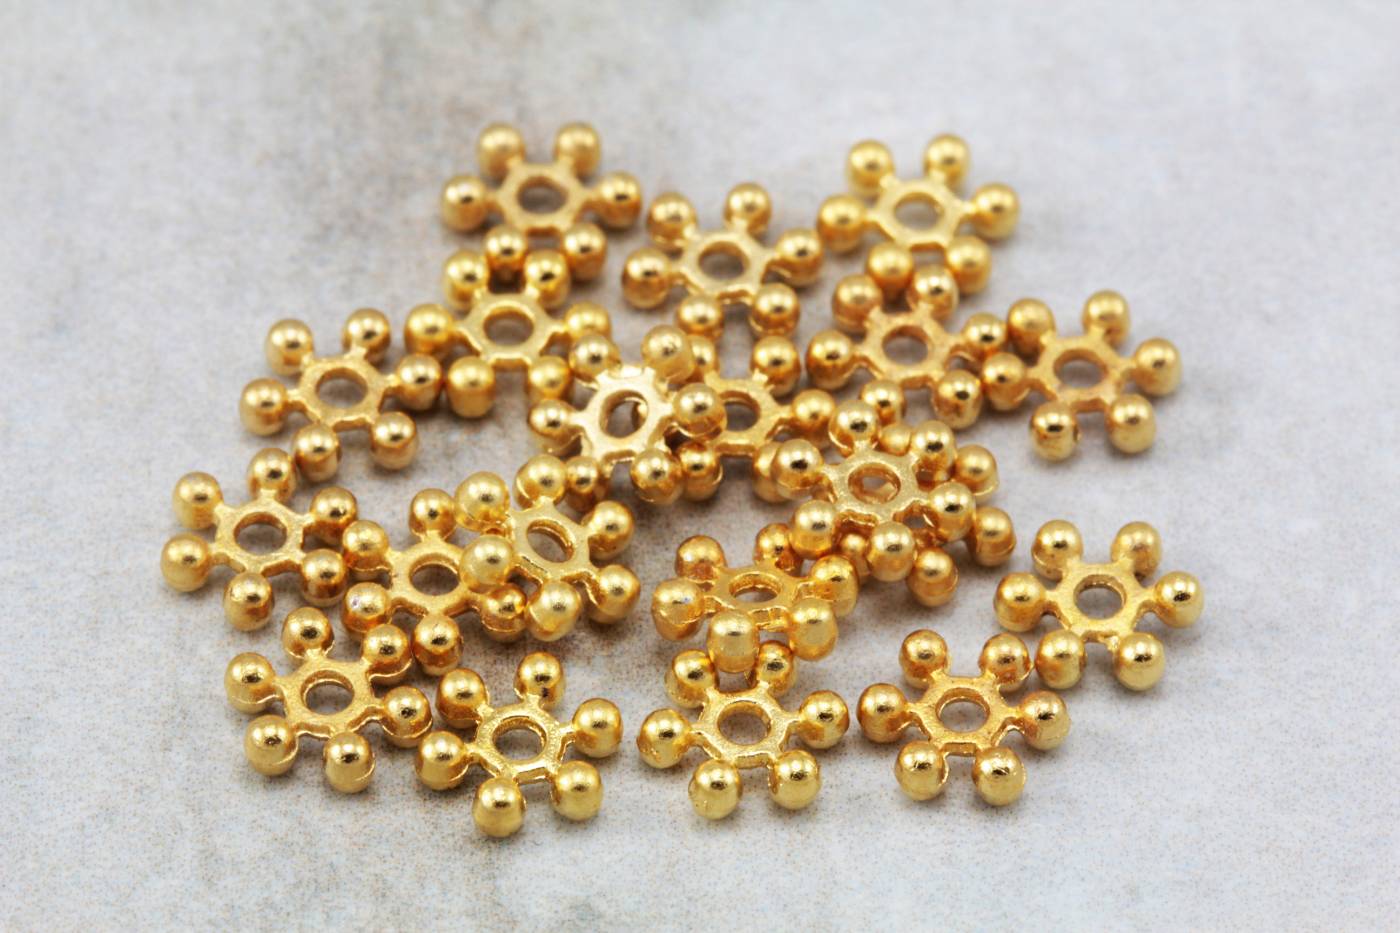 gold-snowflake-shape-rondell-spacer-bead